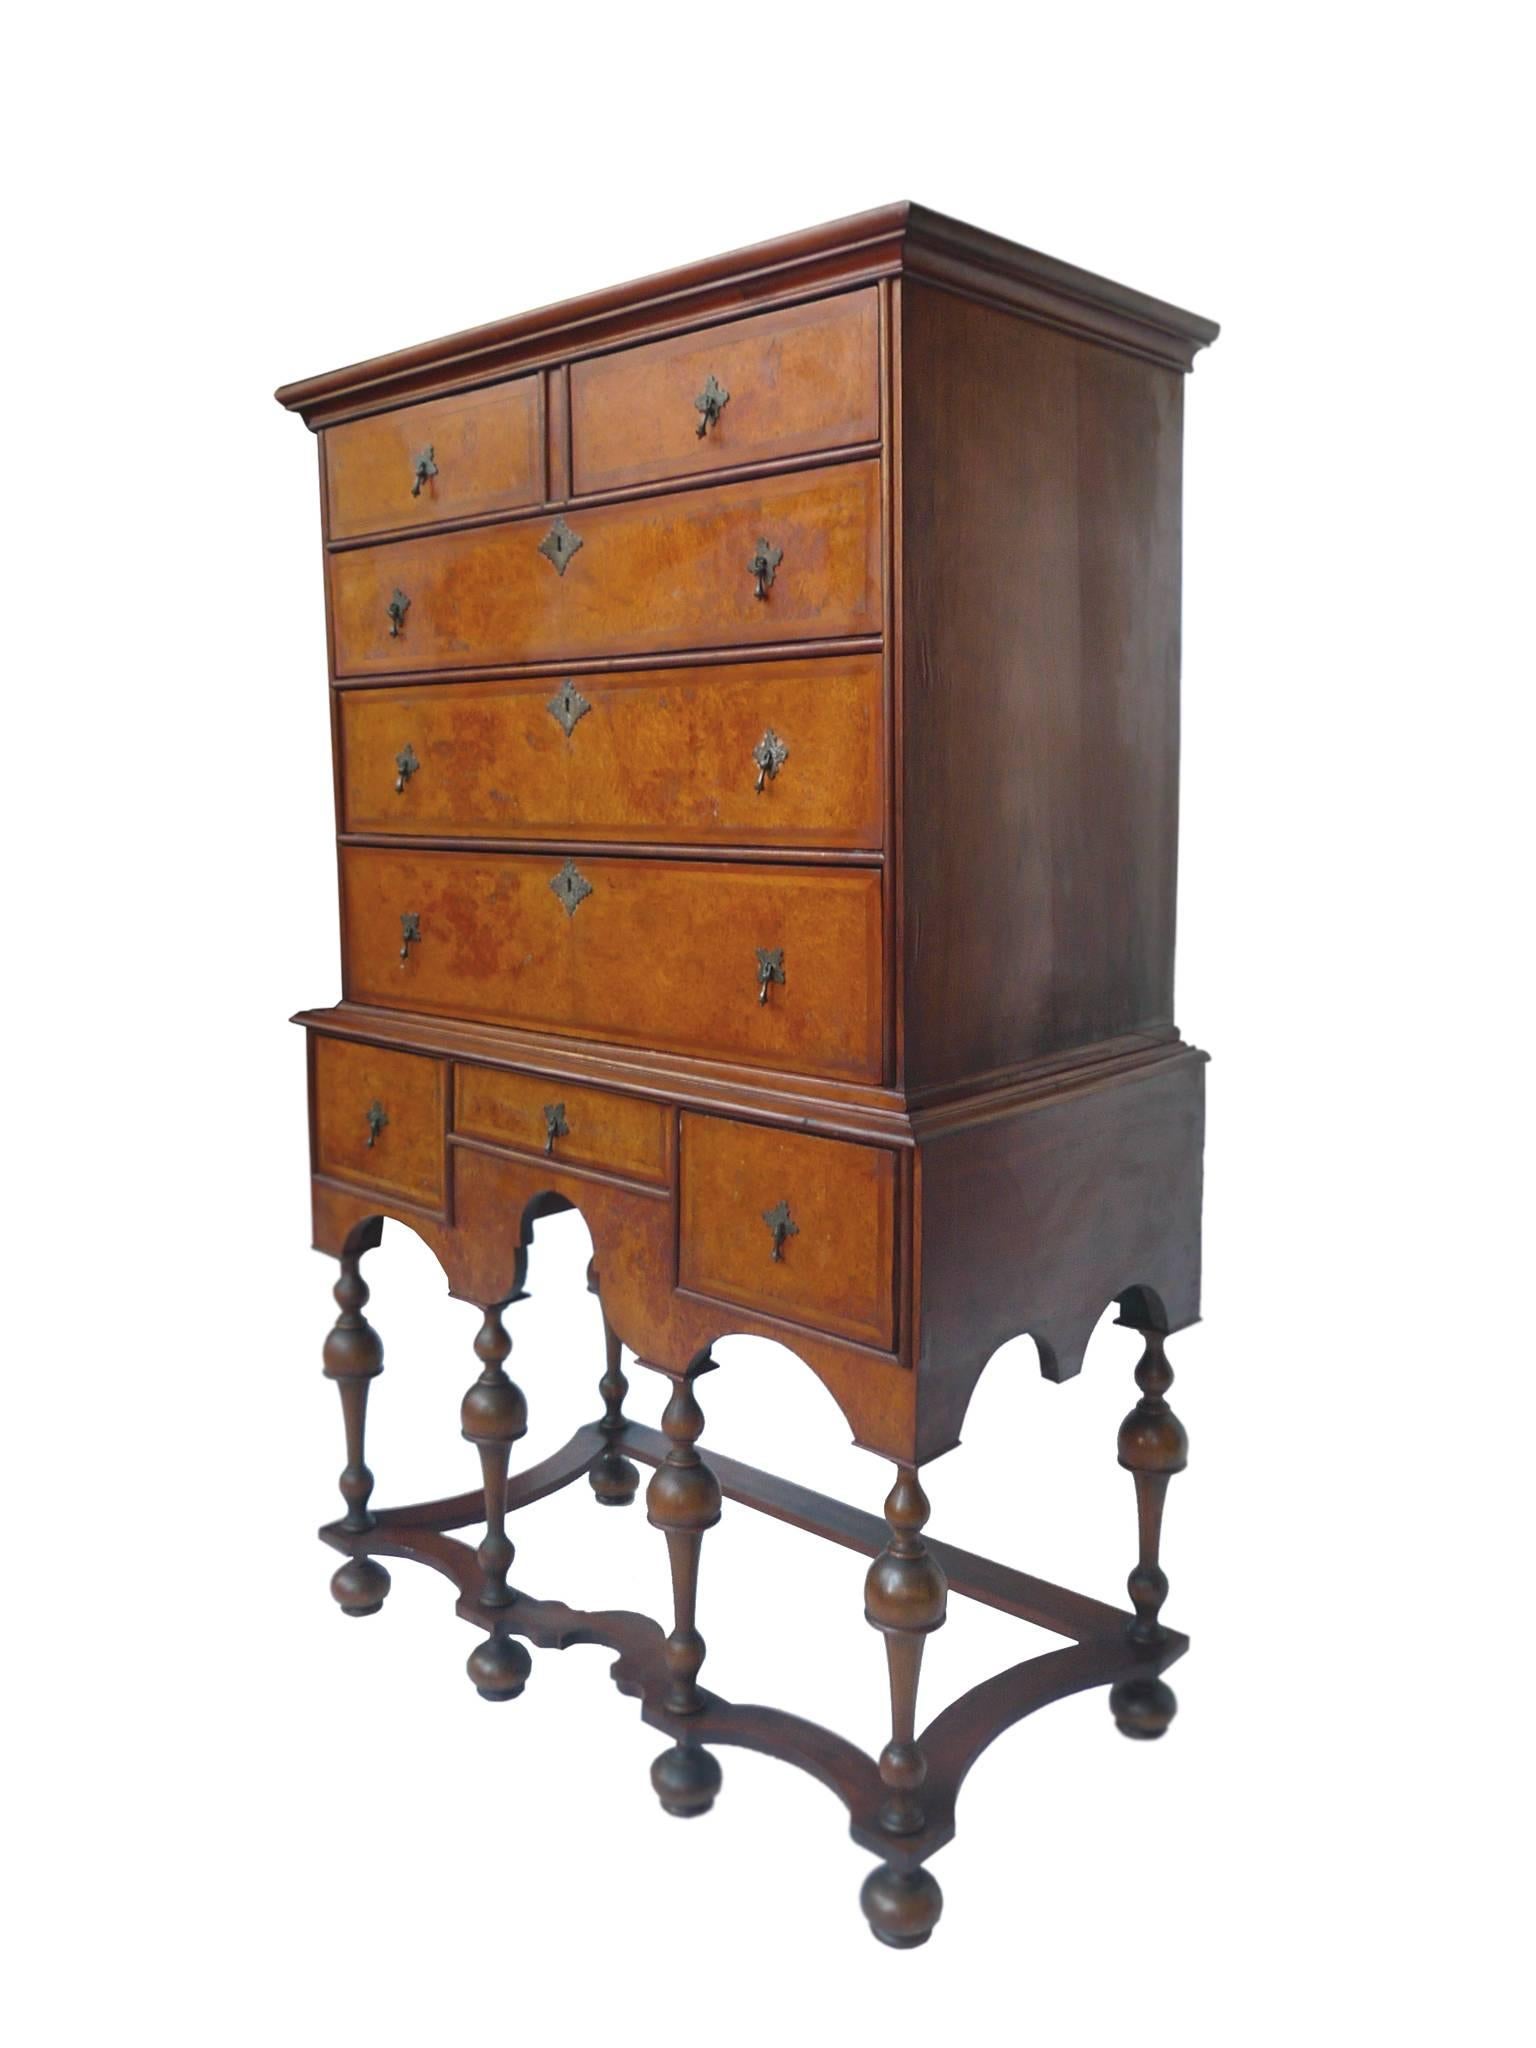 This late 17th century William & Mary highboy is beautifully crafted from mahogany. It is comprised of two detachable parts, the lower chest which has three drawers, and the flattop chest, which has five drawers. The wood has a reddish, warm tone